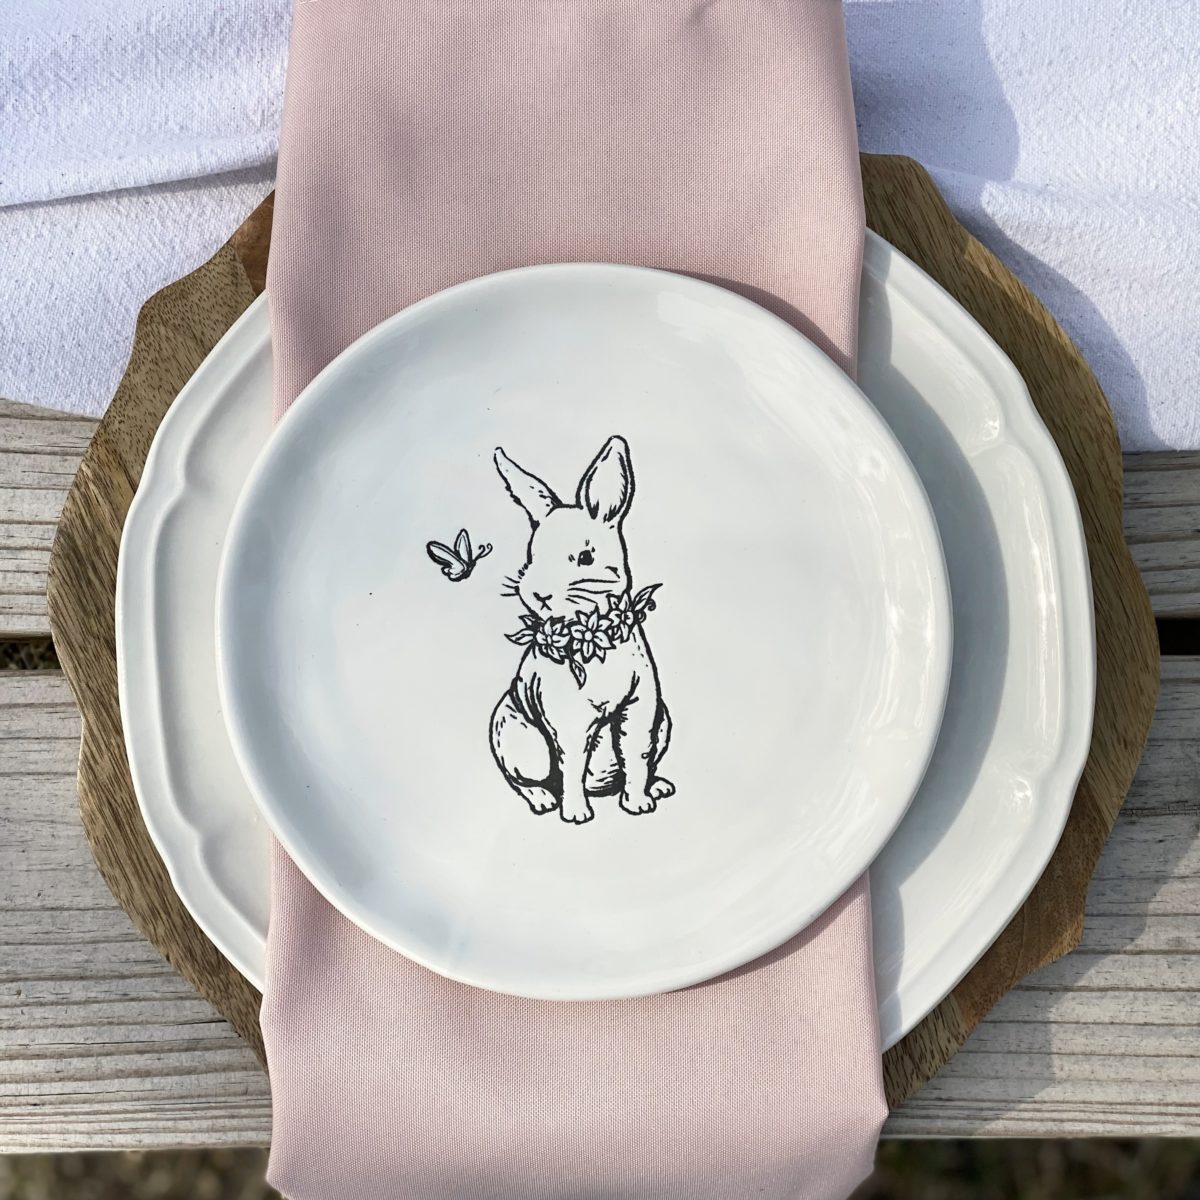 Wood charger, white plate , and a bunny plate set on the table.